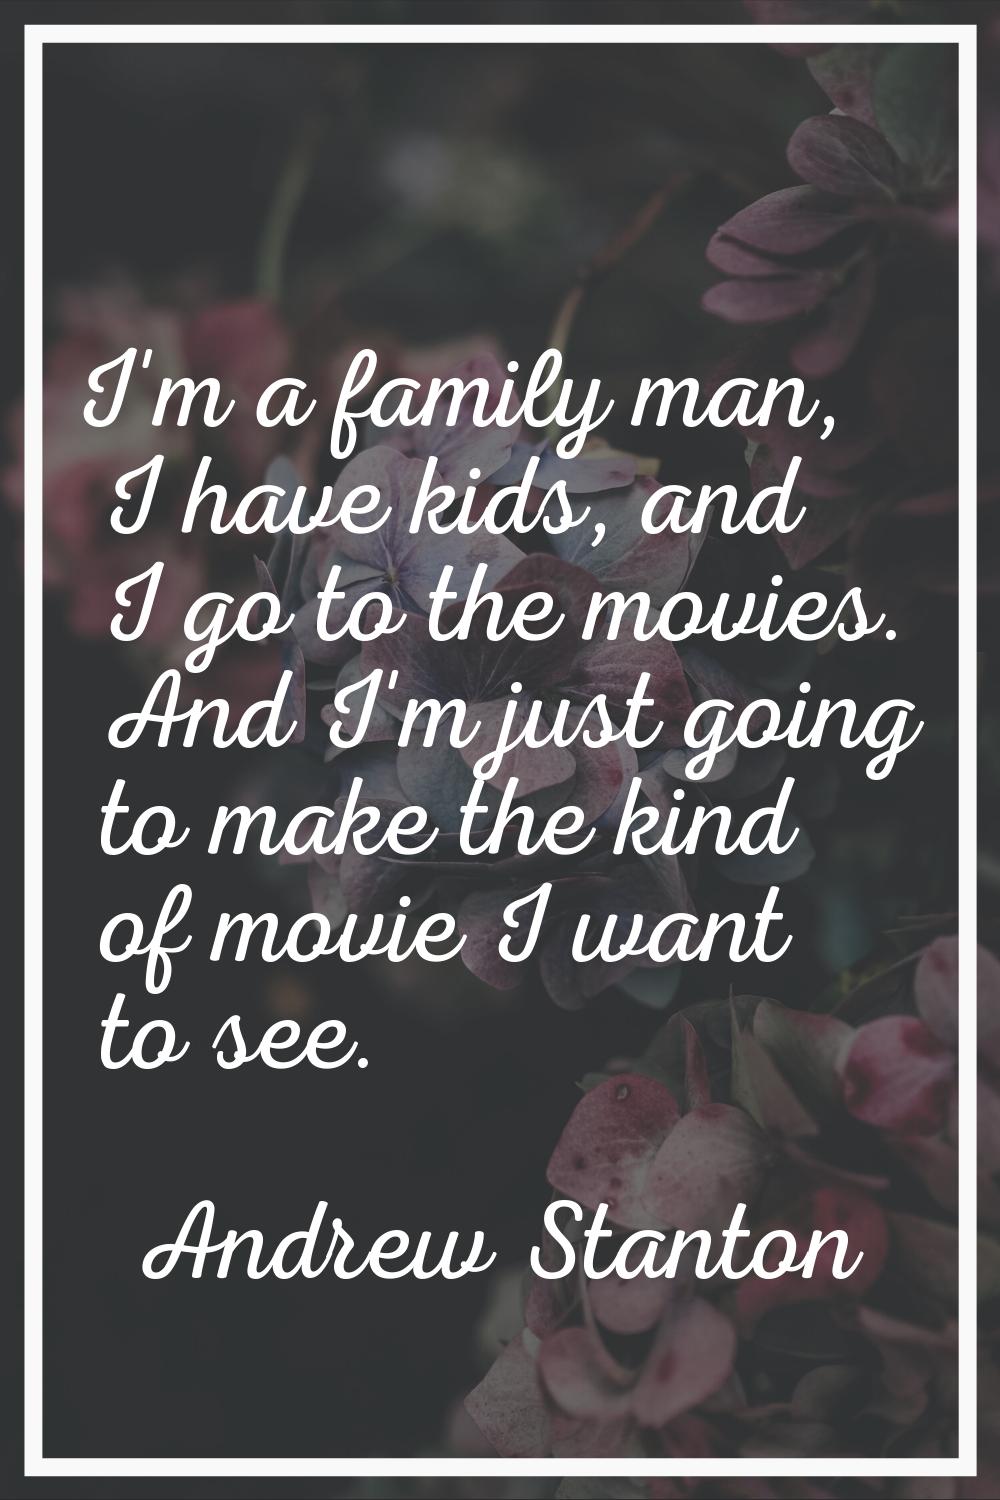 I'm a family man, I have kids, and I go to the movies. And I'm just going to make the kind of movie